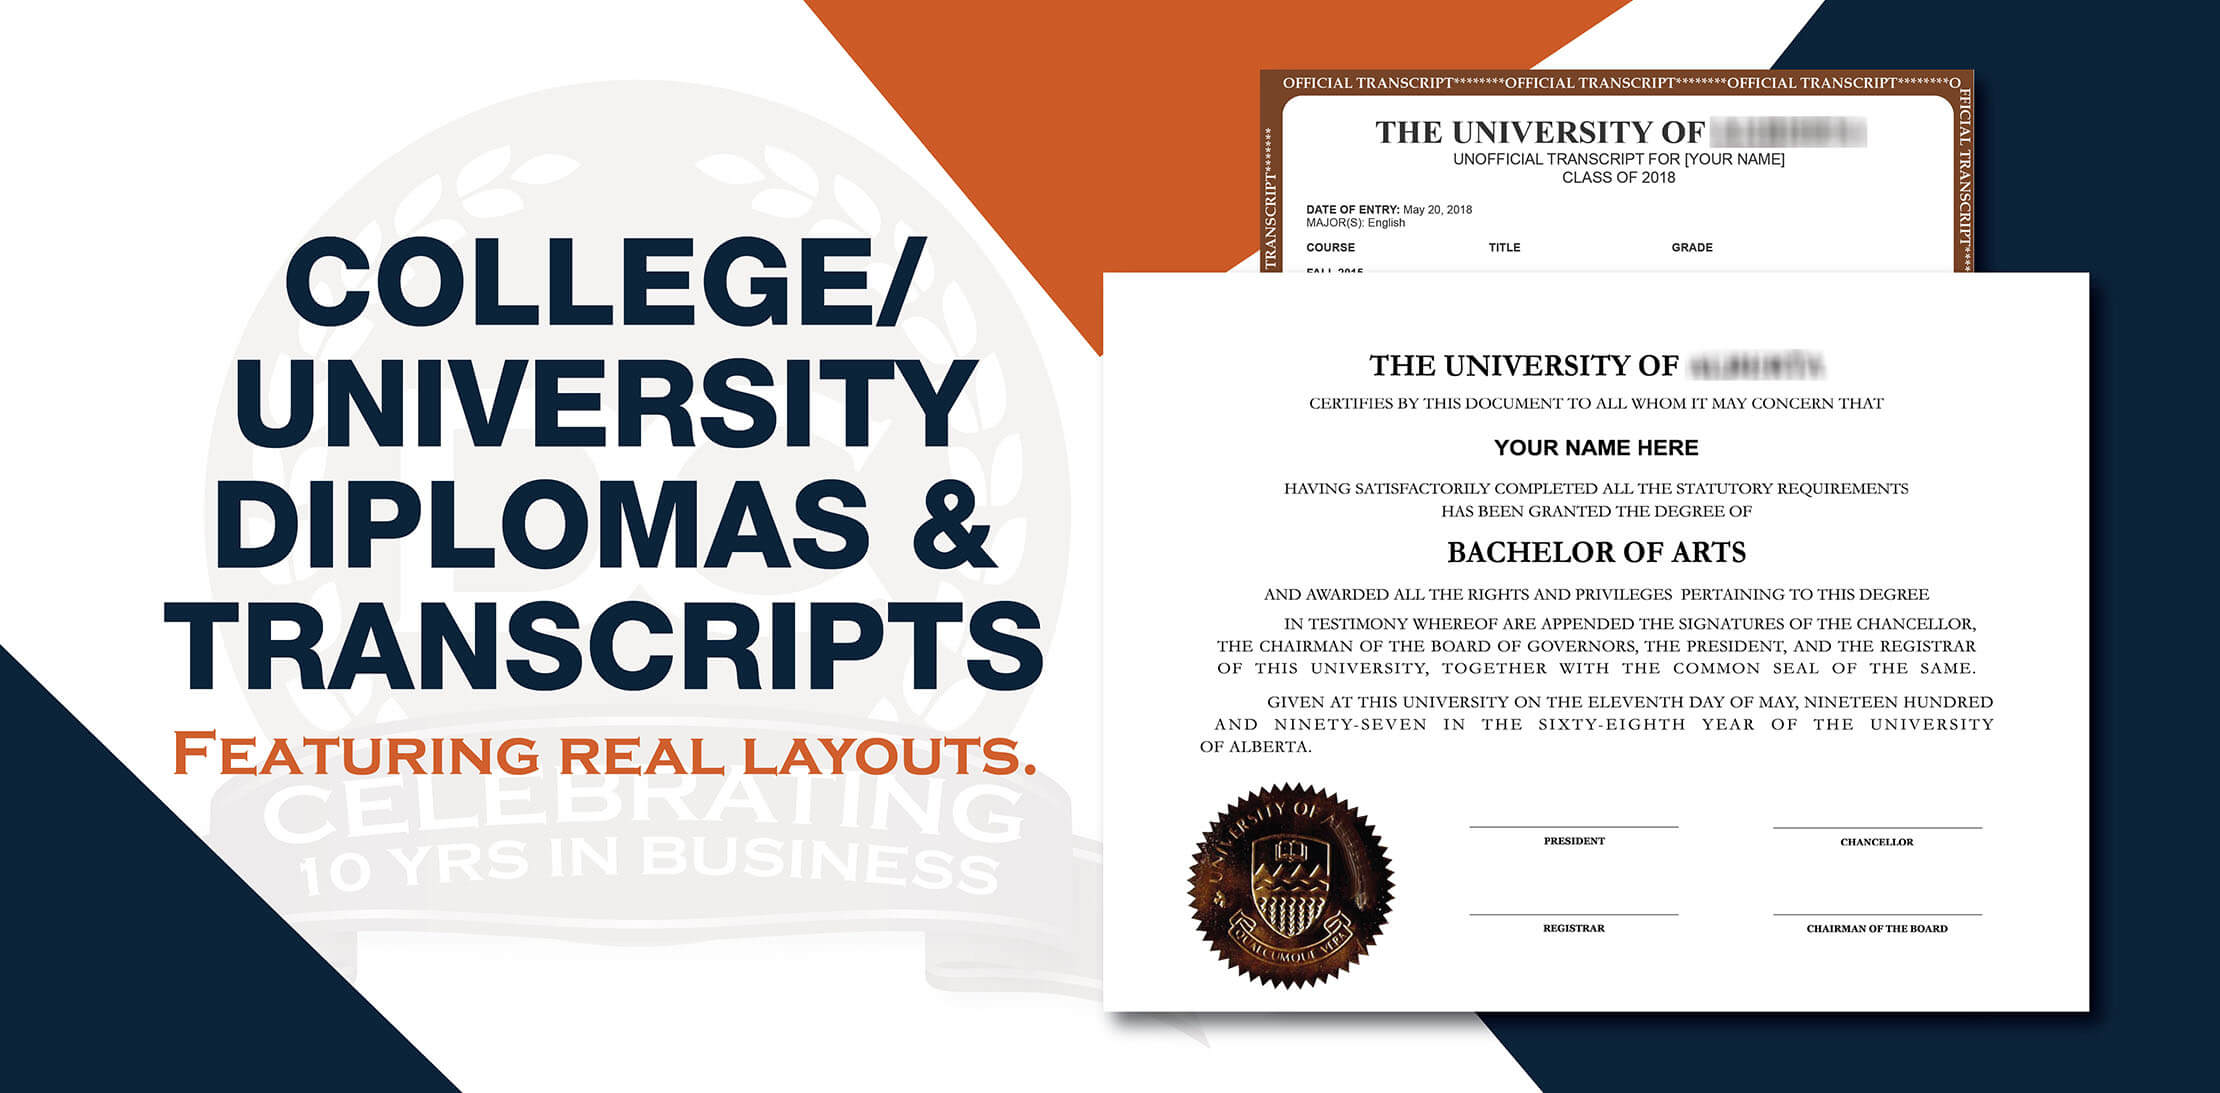 Buy a fake college diploma and transcript sets. Save 20% today! 100% custom-made university packages! Only print shop with real embossed text and raised seals!
